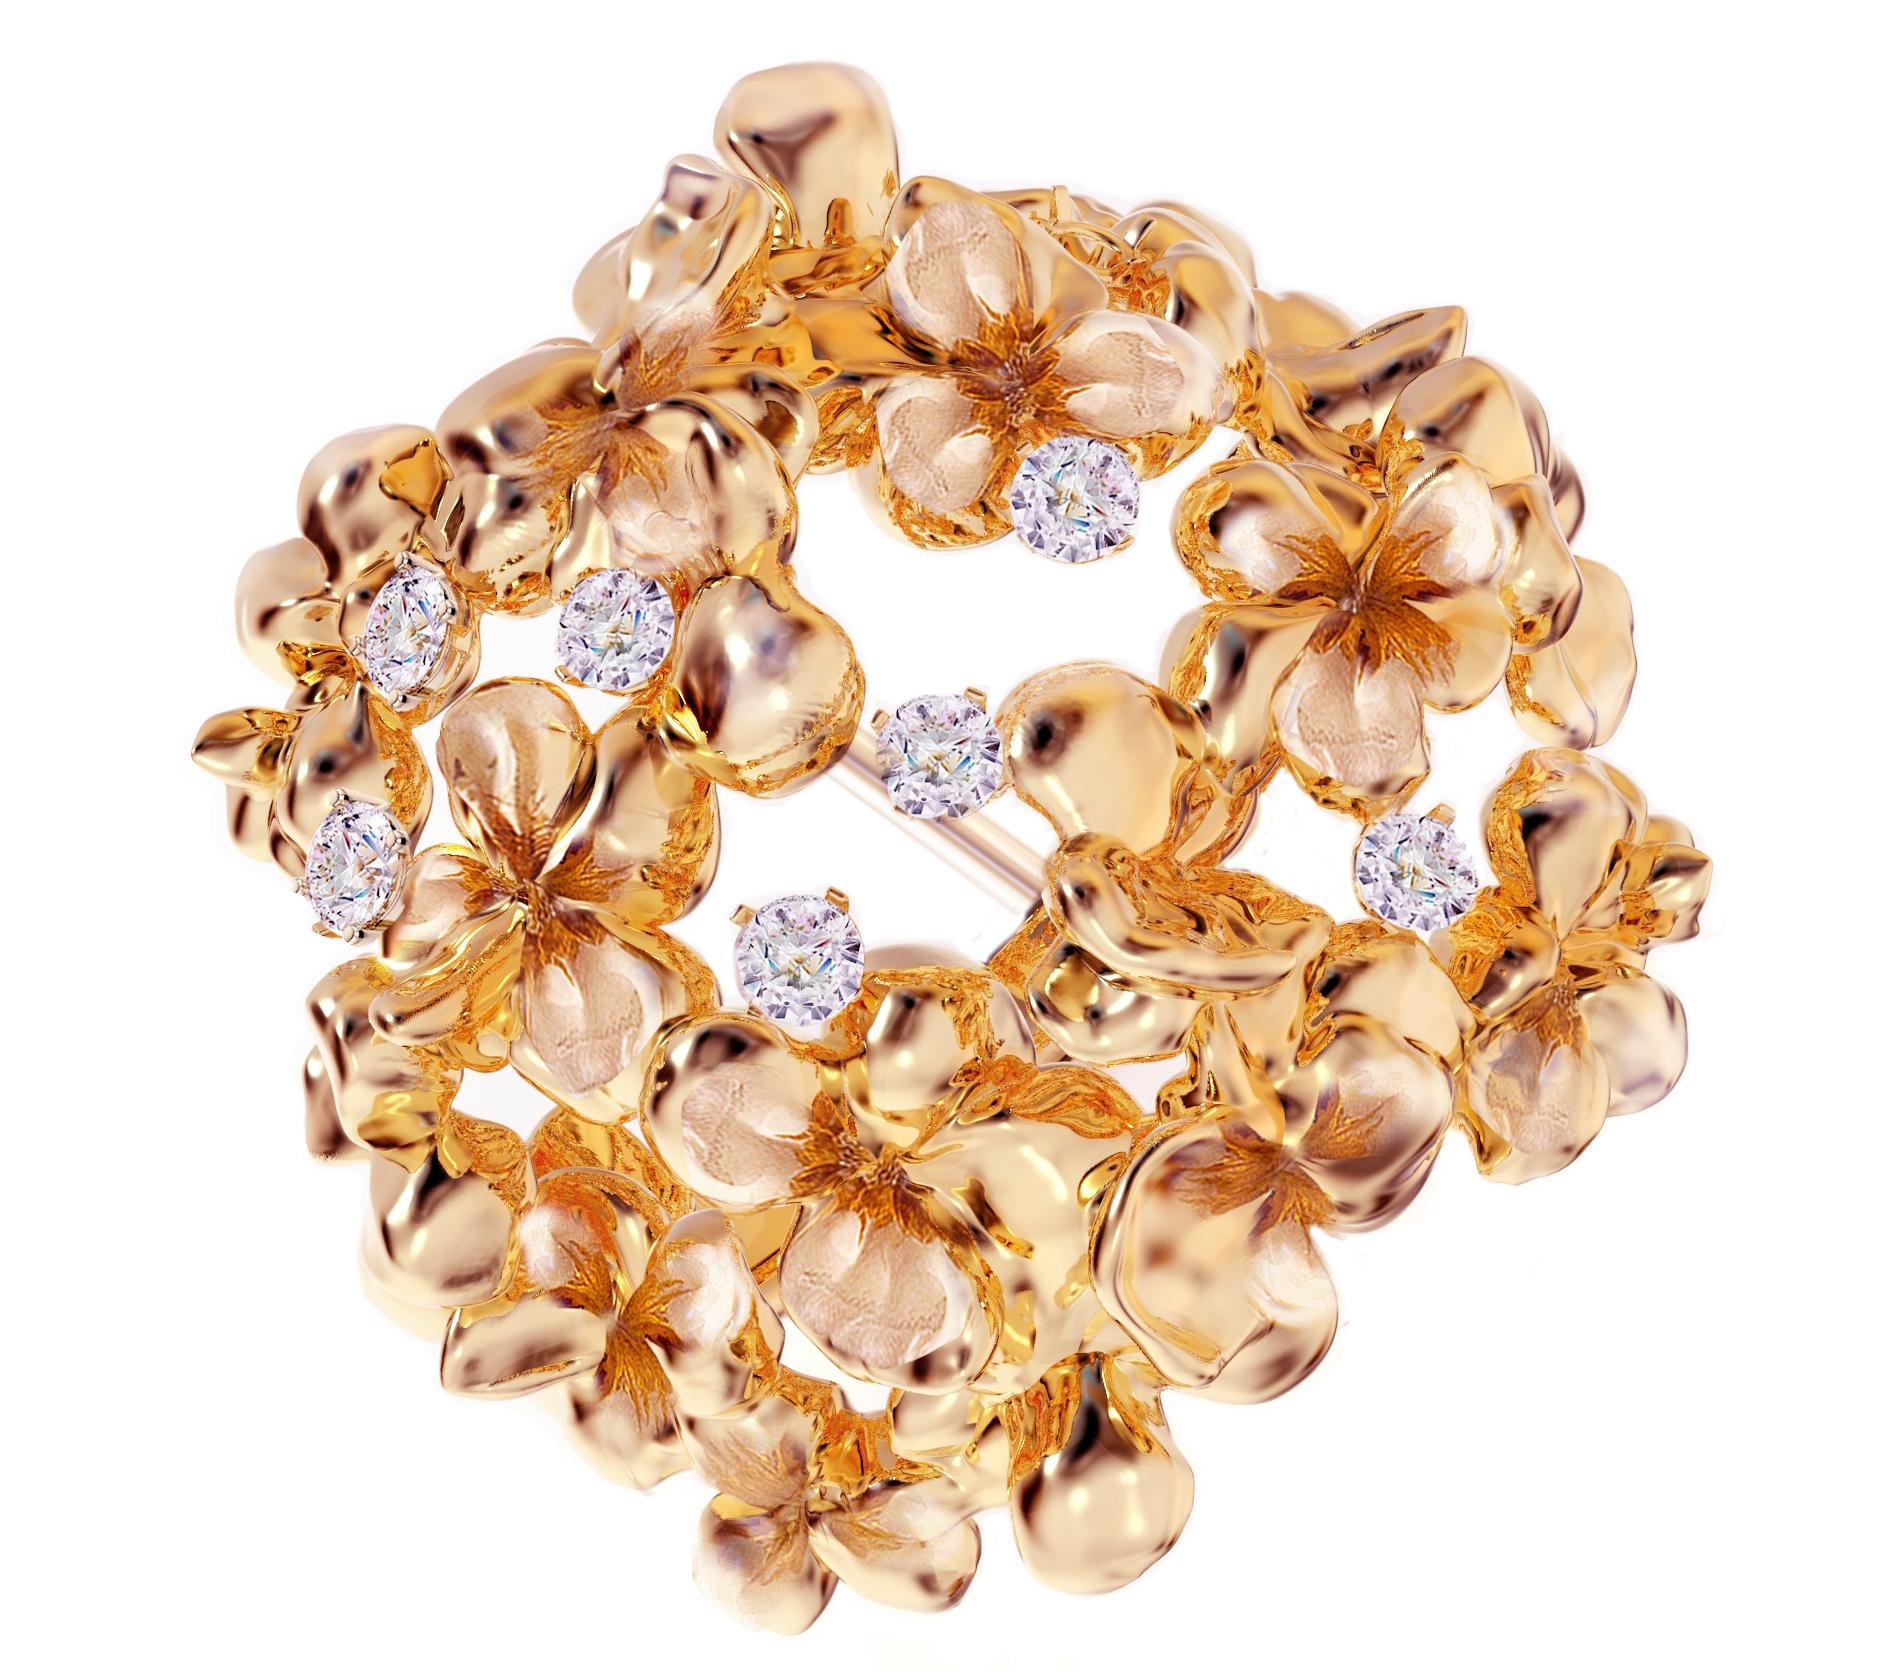 This contemporary Hortensia floral brooch is crafted from 18 karat rose gold and adorned with seven round natural diamonds (VS, F-G). The sculptural design adds extra highlights to the surface of the gold, while the diamonds add a delicate sparkle.